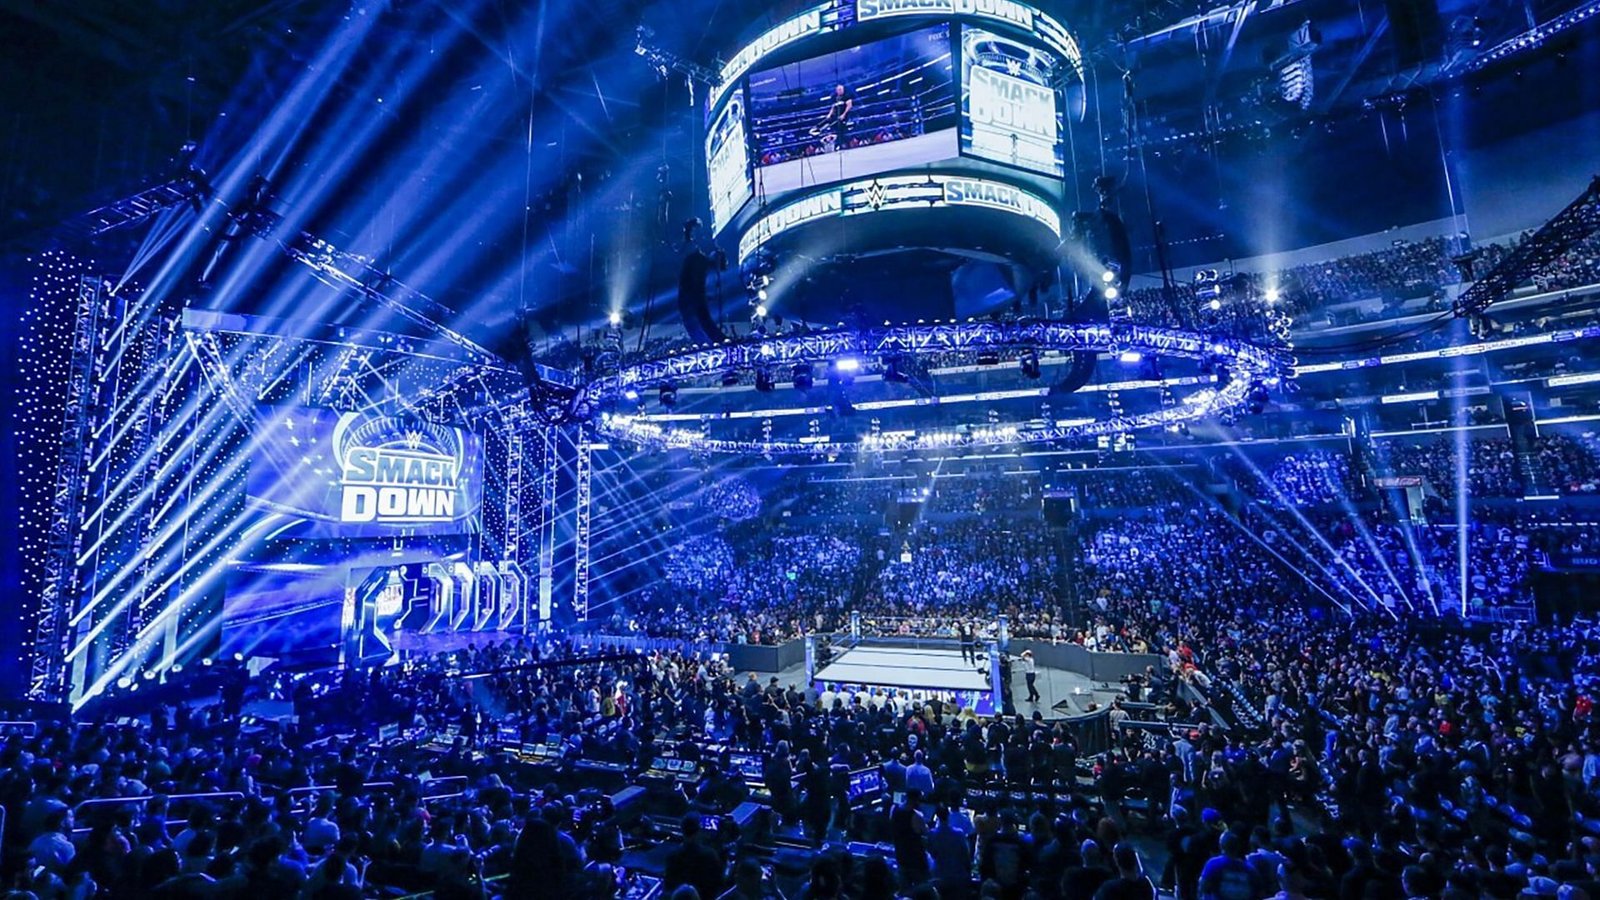 Former WWE Champion set to wrestle at SmackDown